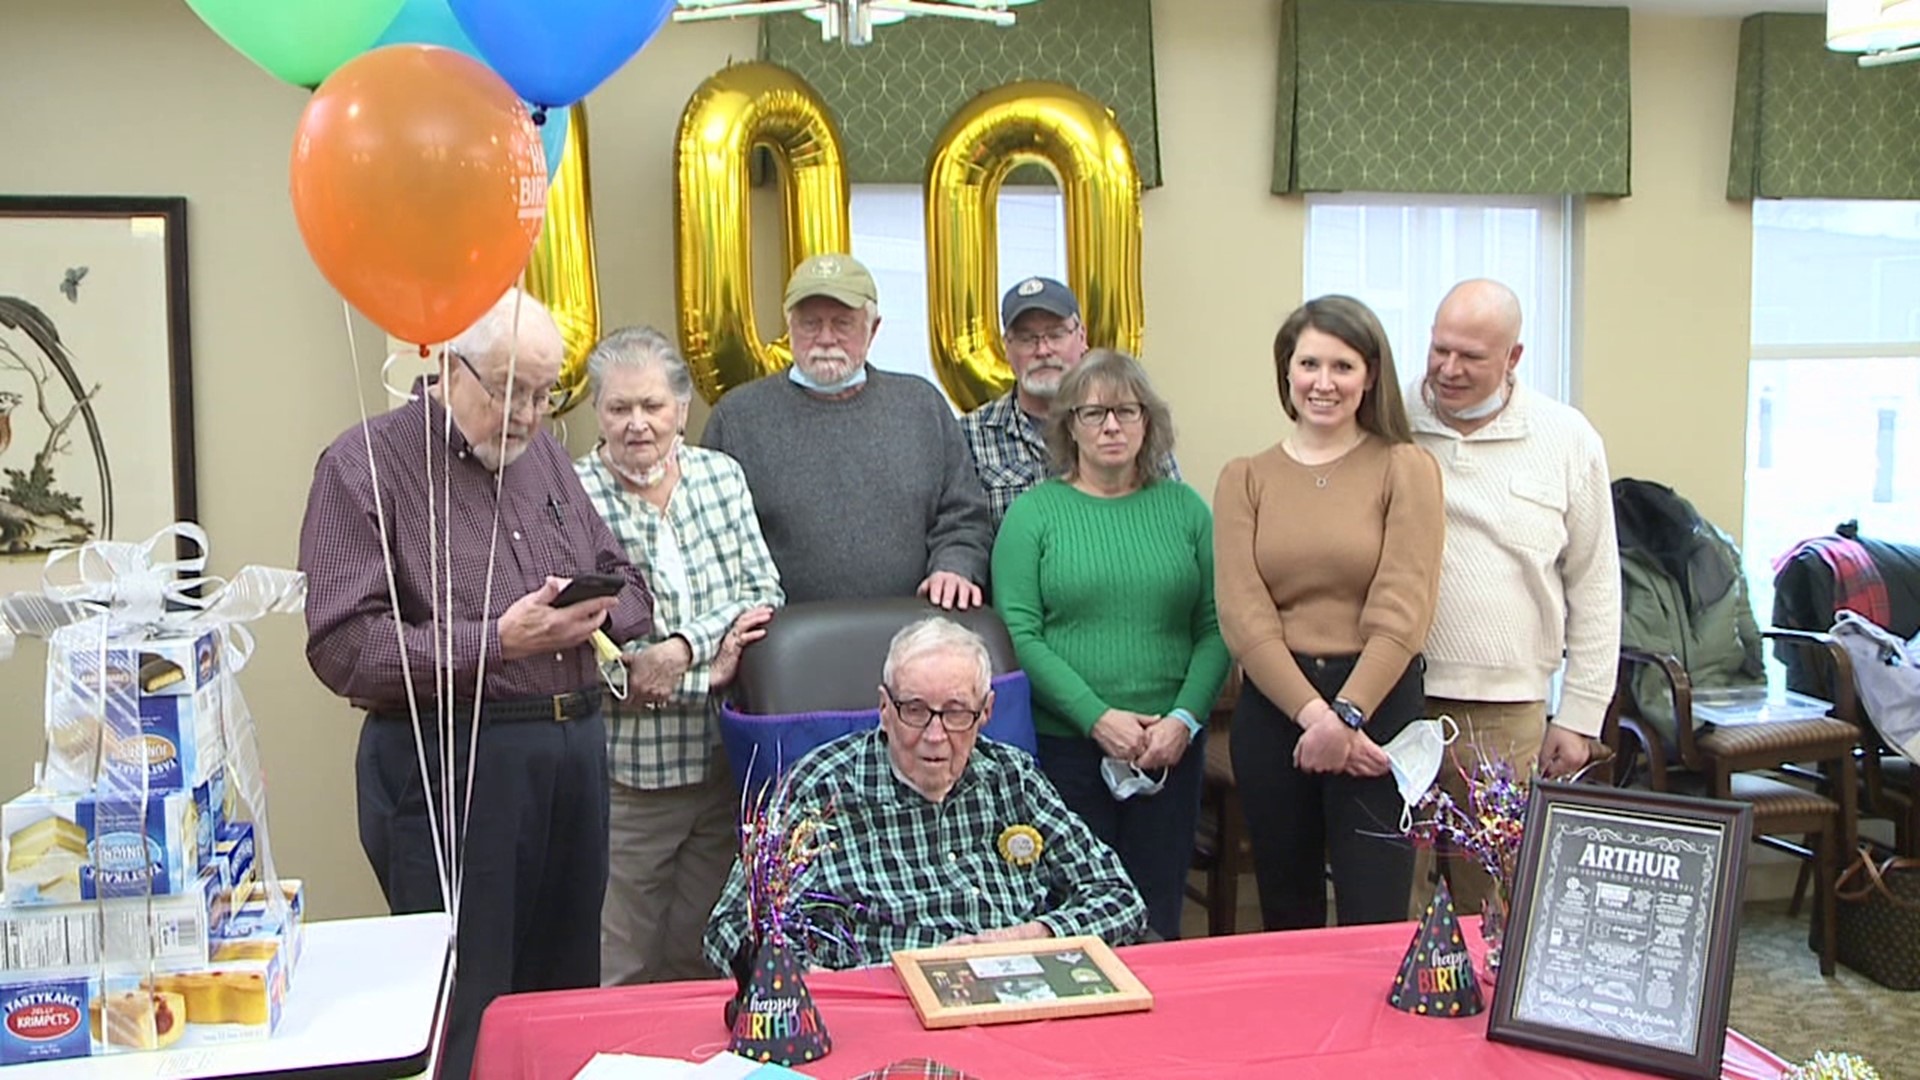 A very special birthday was celebrated in part of Union County on Sunday.